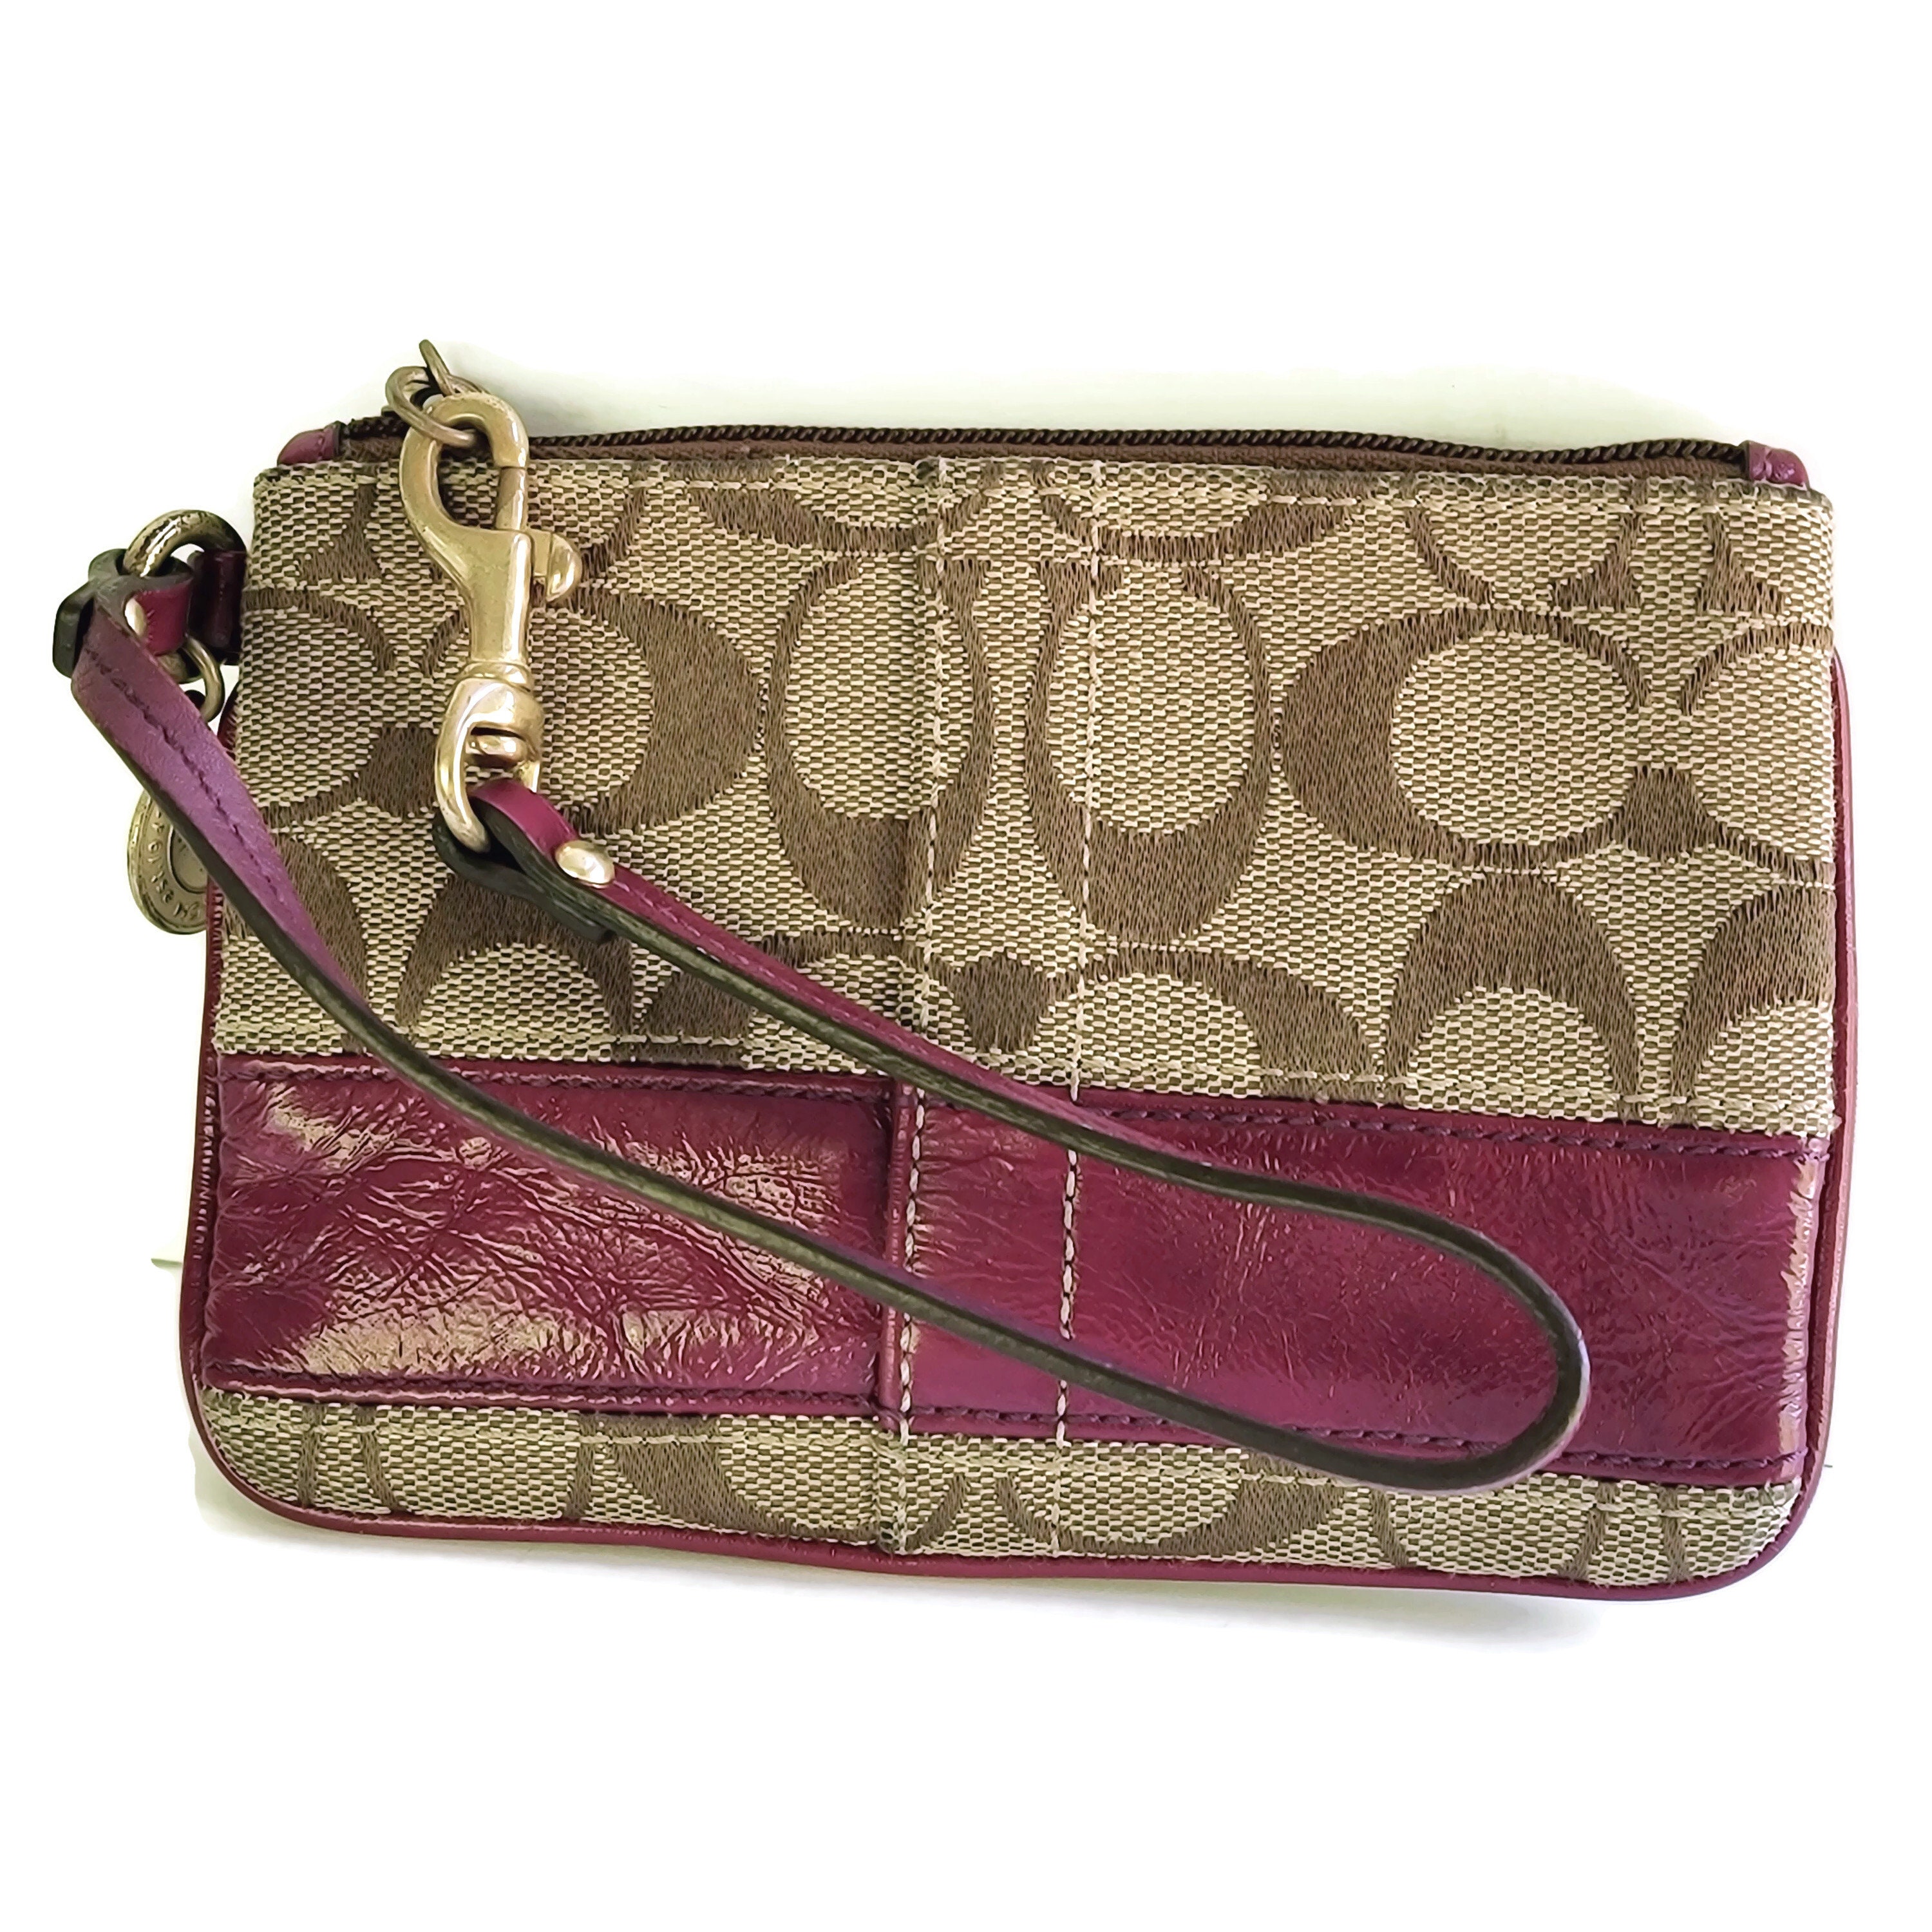 COACH Small Wristlet with Floral Print Style No. C5997 Chalk Multi :  Amazon.in: Fashion